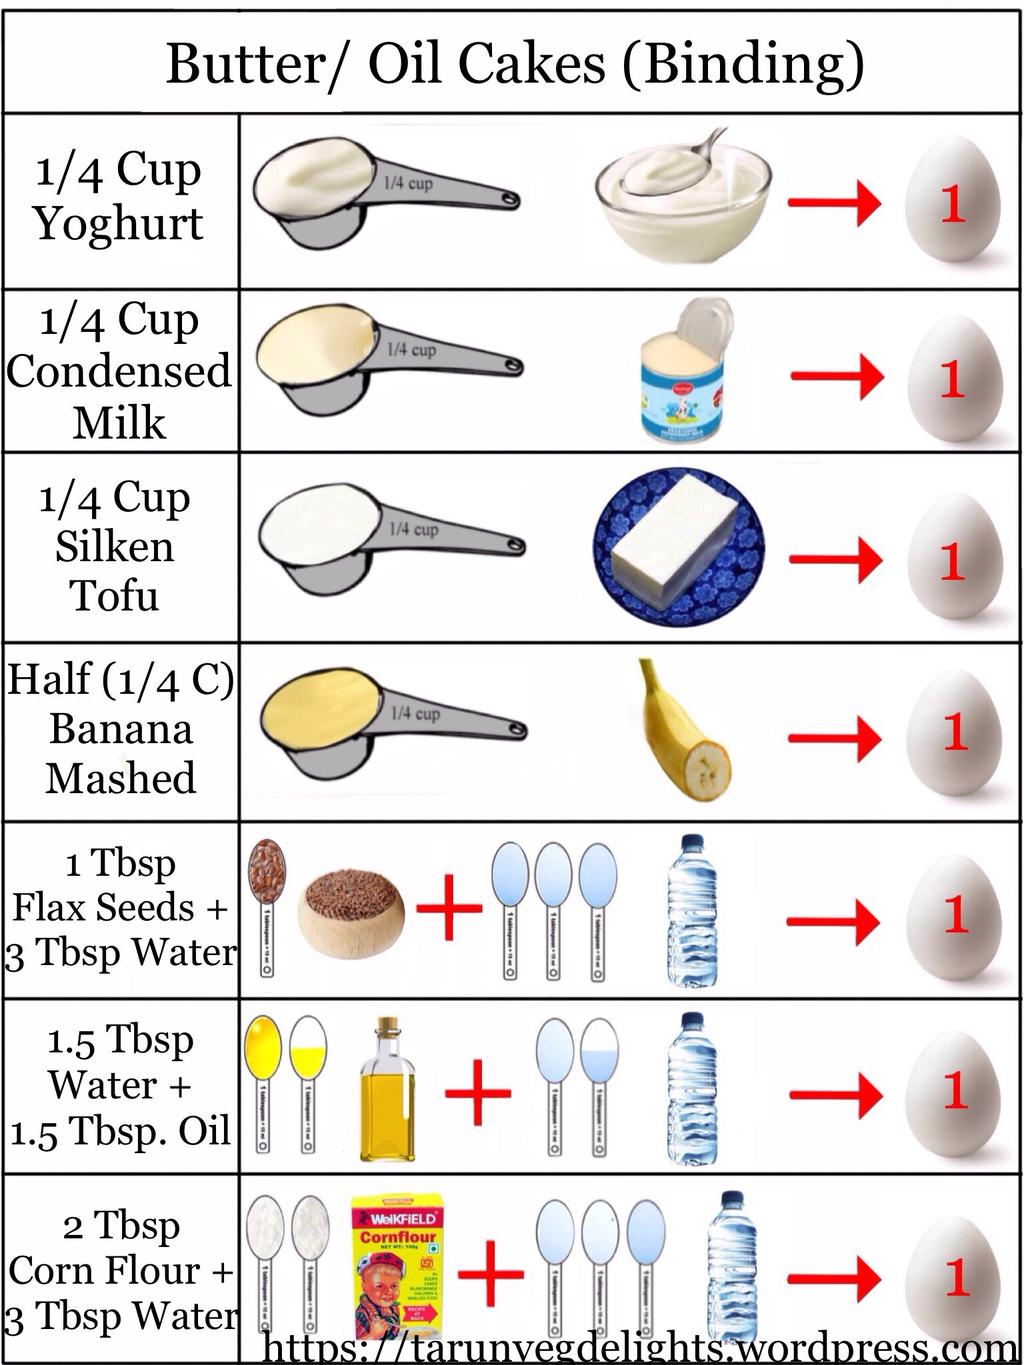 Alternative ingredients For students that are allergic to eggs, please see ingredient ideas below If you know how to adapt these ingredients otherwise, then please follow what you already know/ use